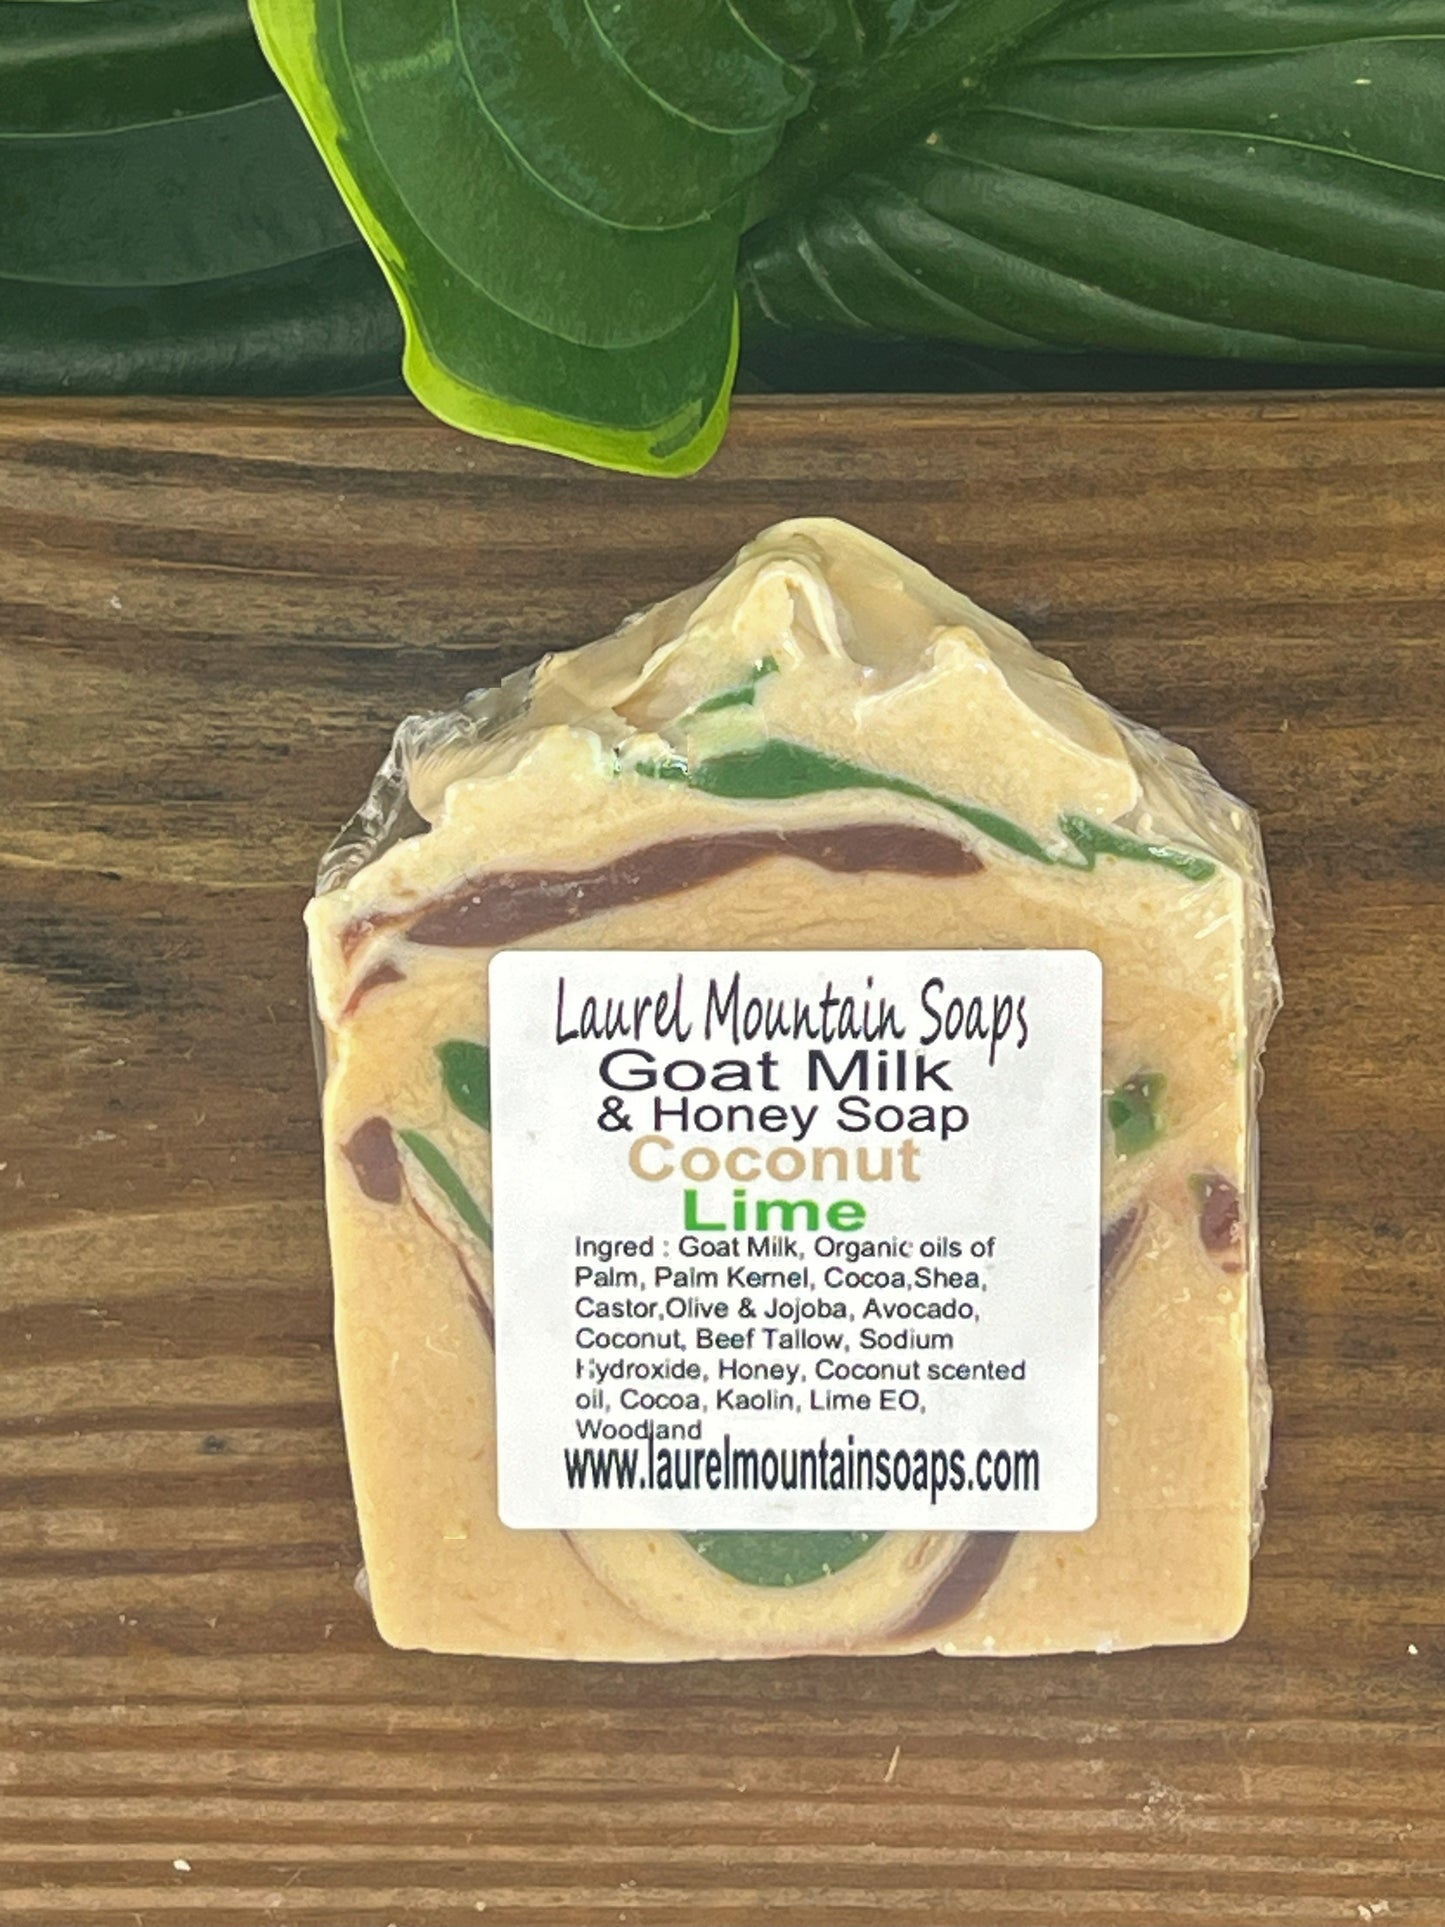 Coconut Lime Goat Milk and Honey Soap